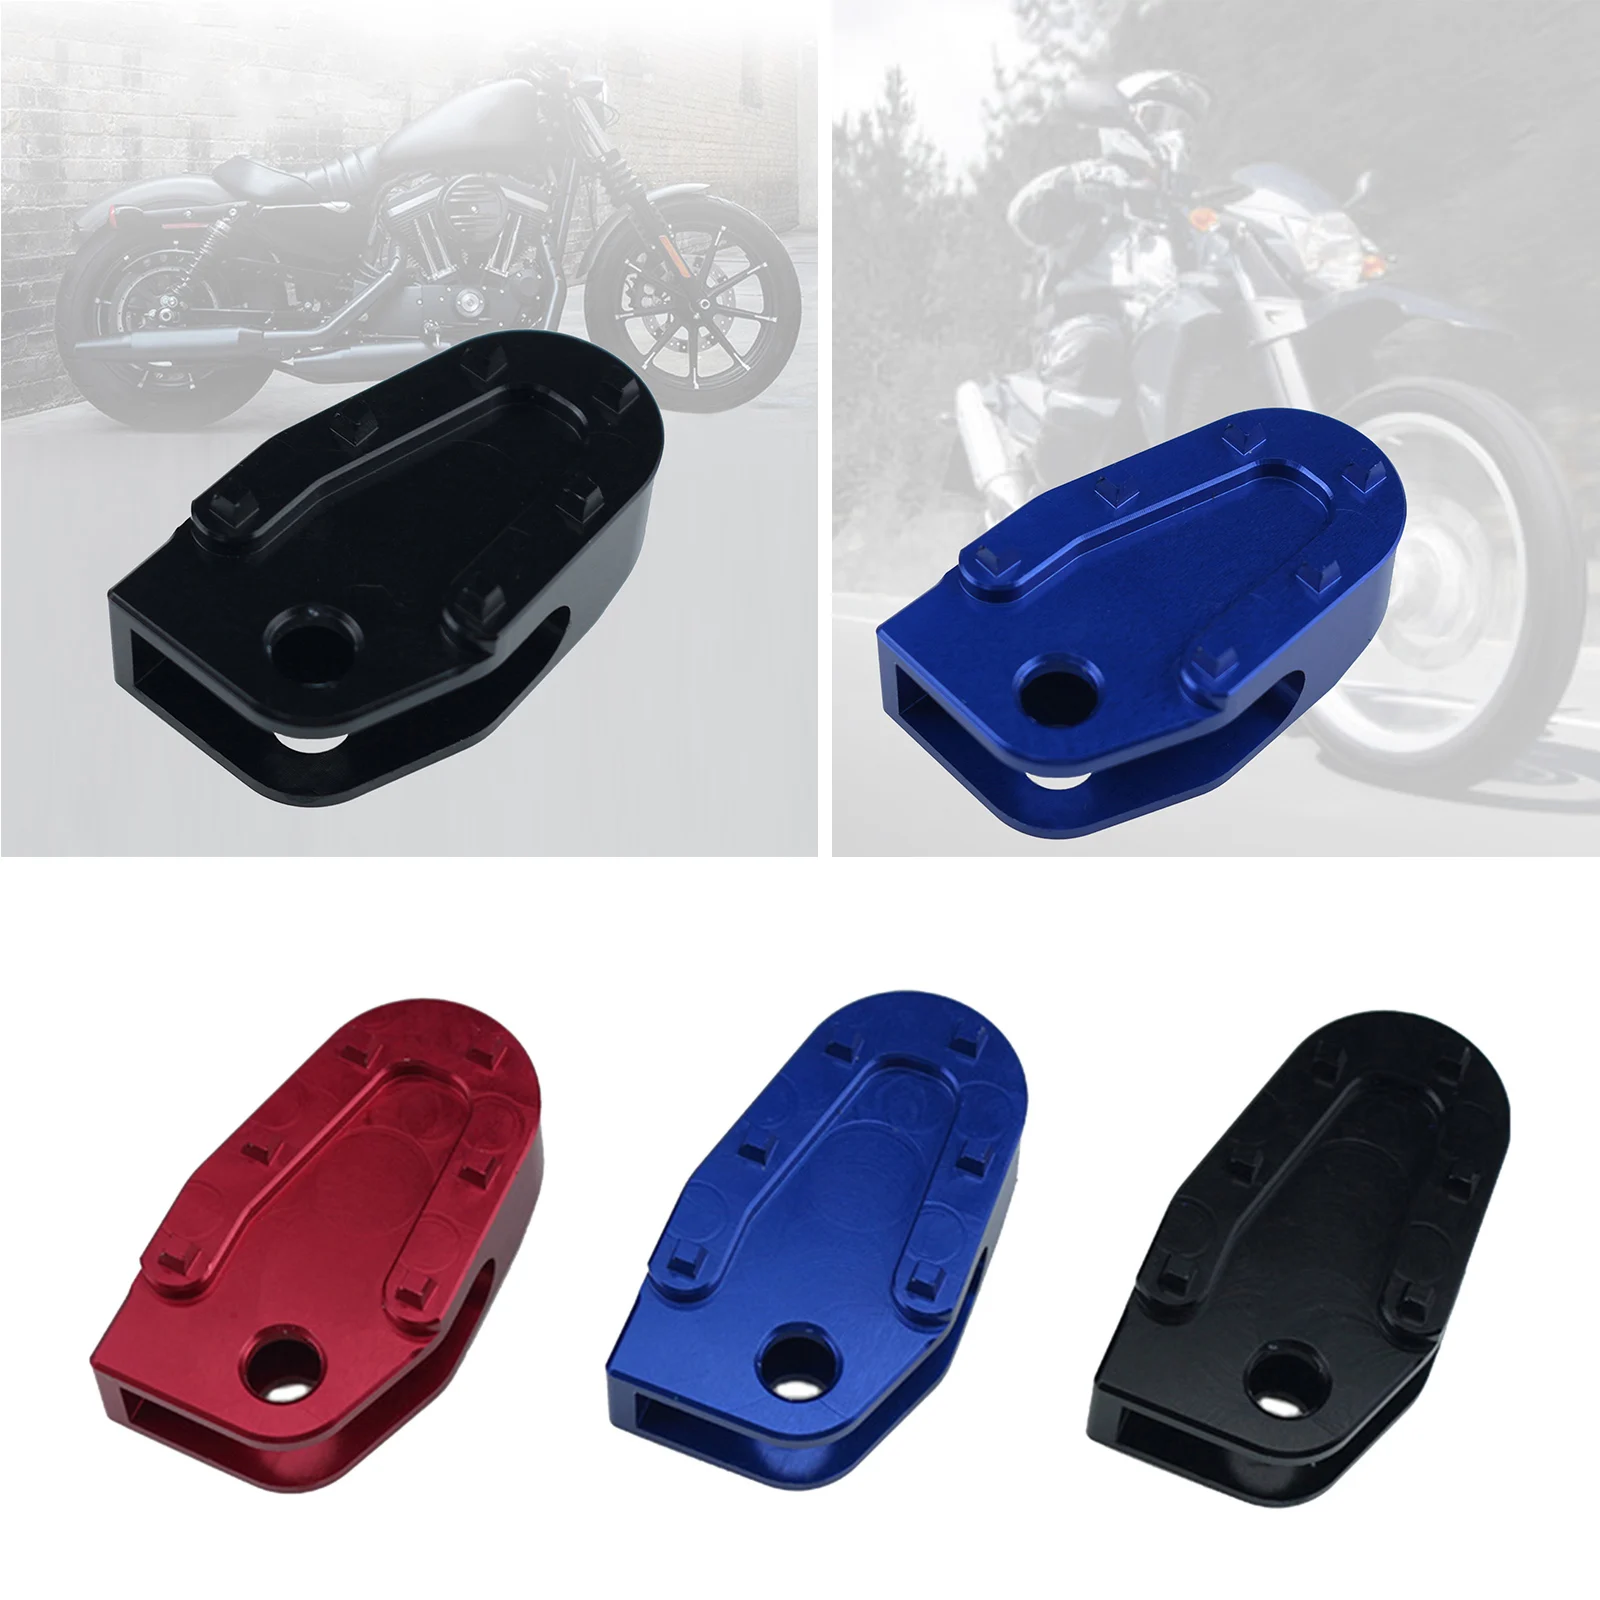 

Aluminum Widening Expanded Motorcycle Brake Pedal Pad Step Plate Support for SUZUKI DRZ400S 2000 Anti Slip Parts Accessories